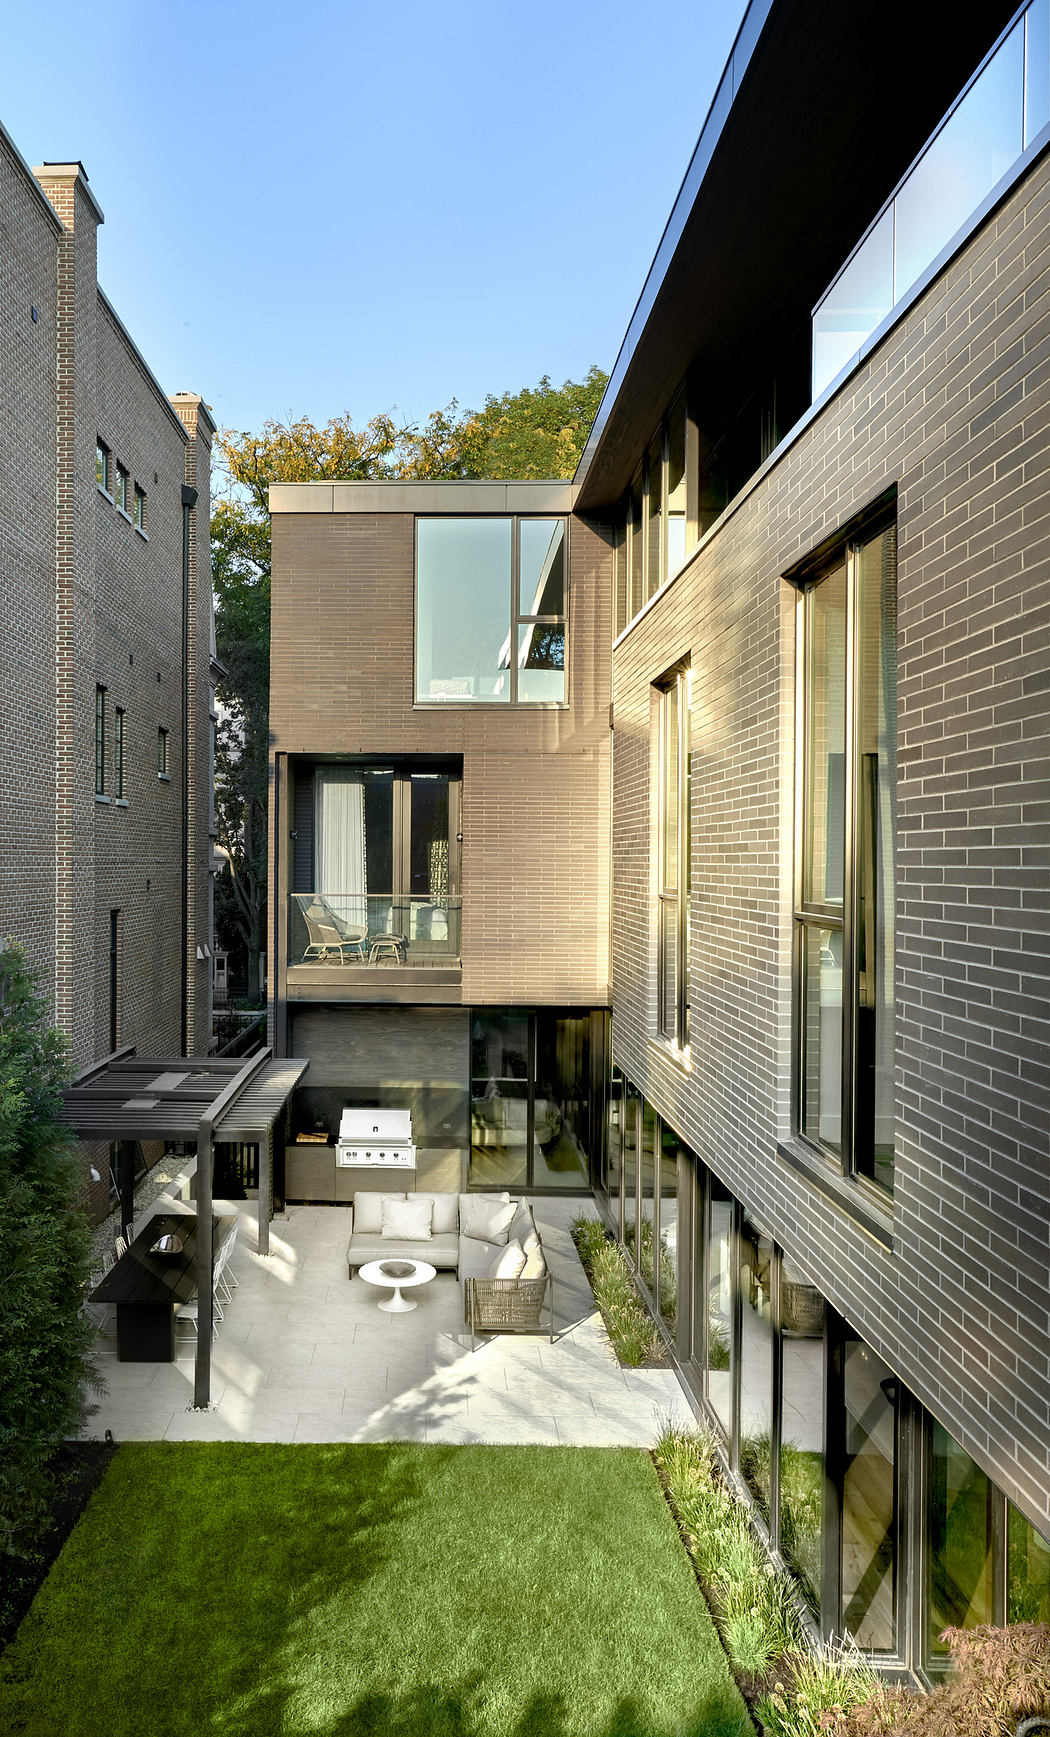 Modern urban backyard with a sleek two-story house and landscaped garden.